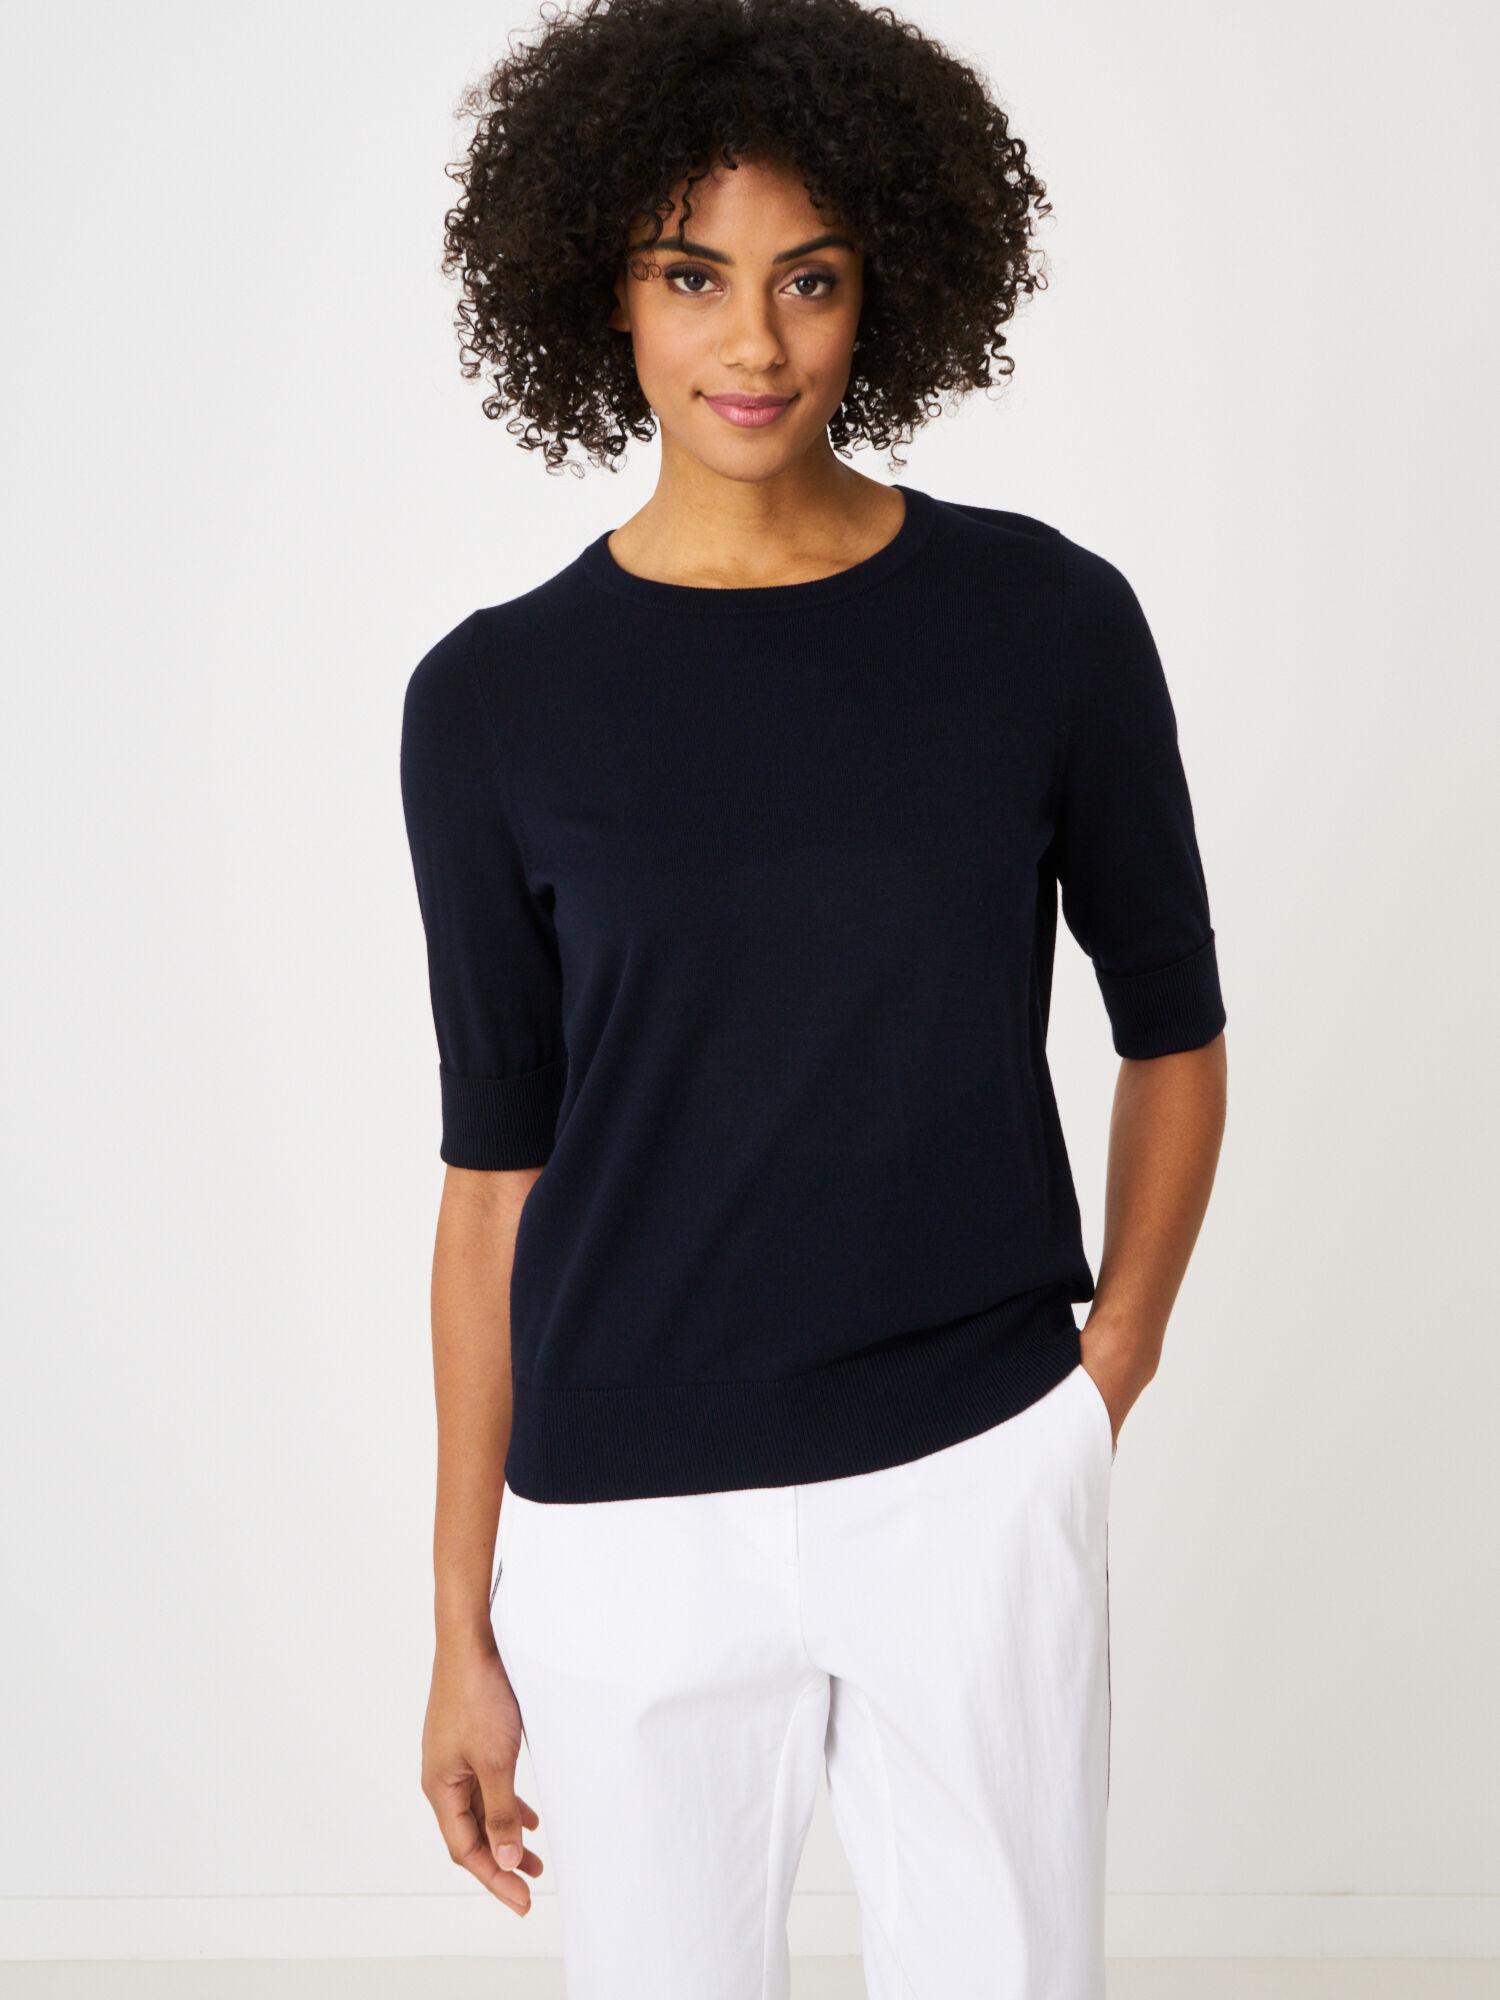 Luxurious Clothing for Women | REPEAT Cashmere